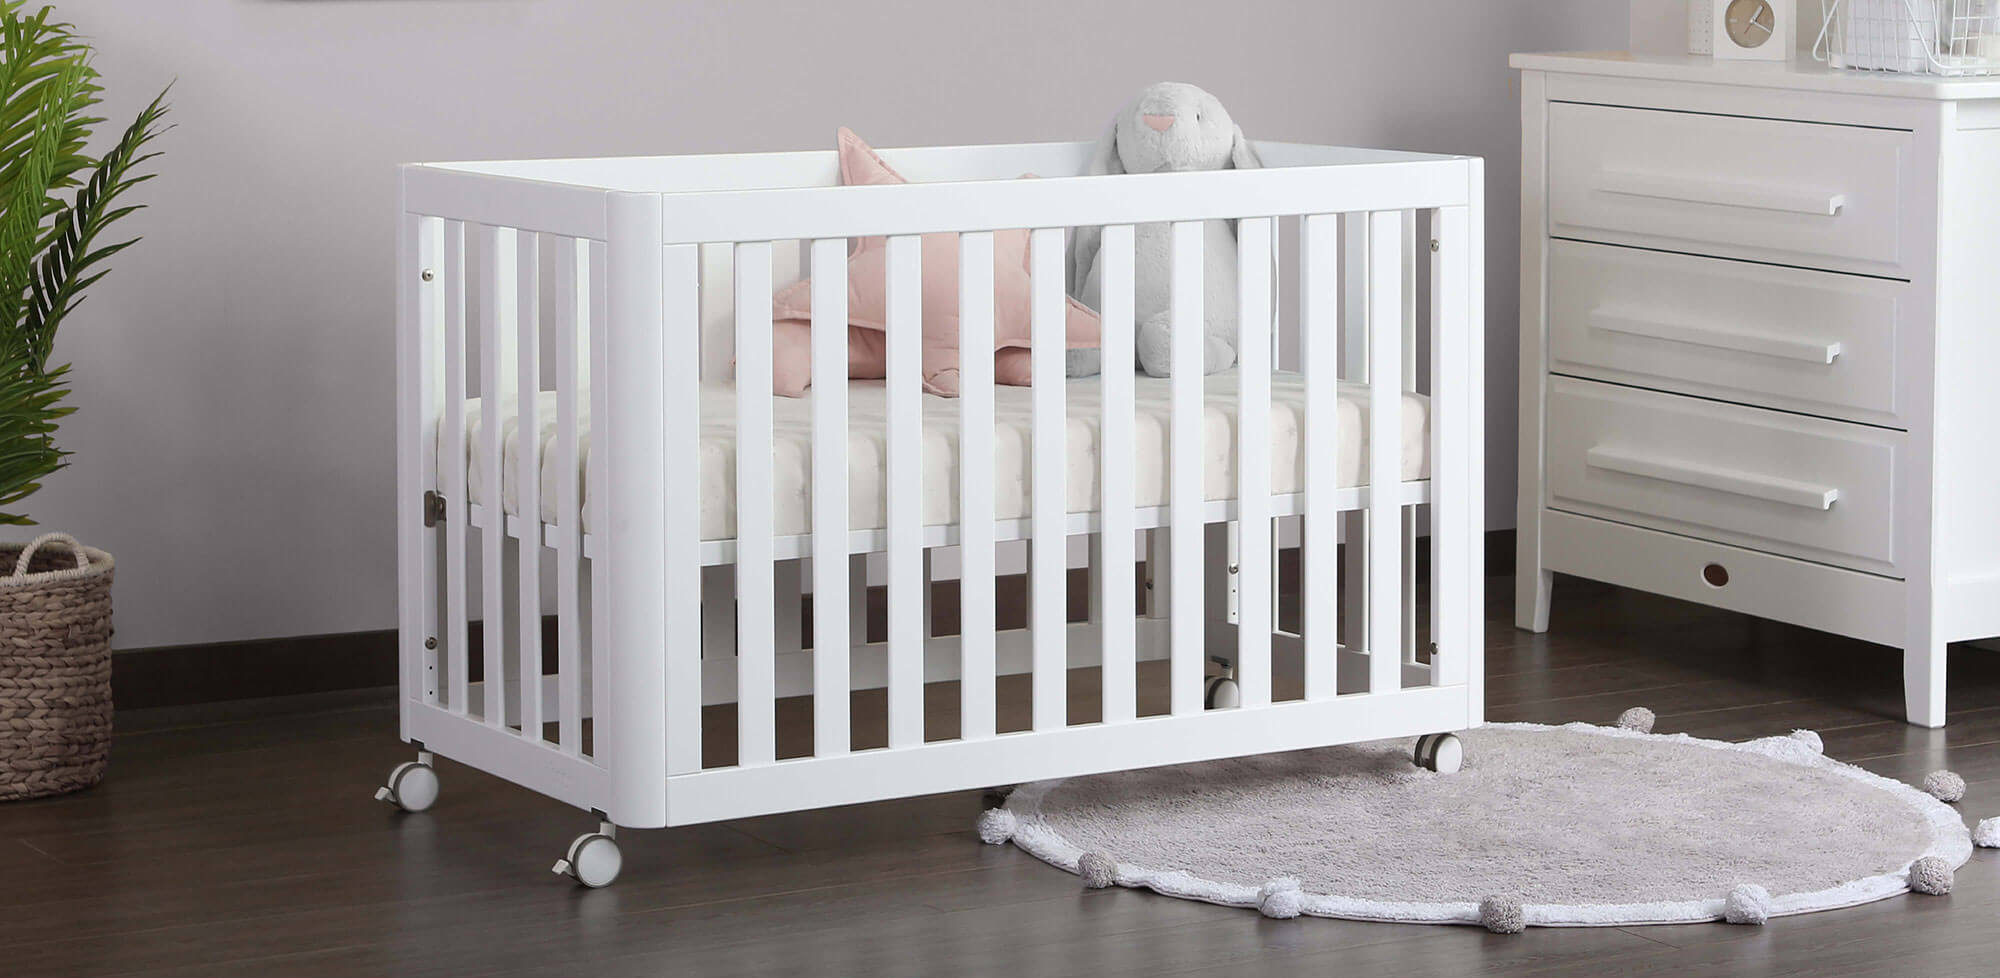 Turin compact cot in white